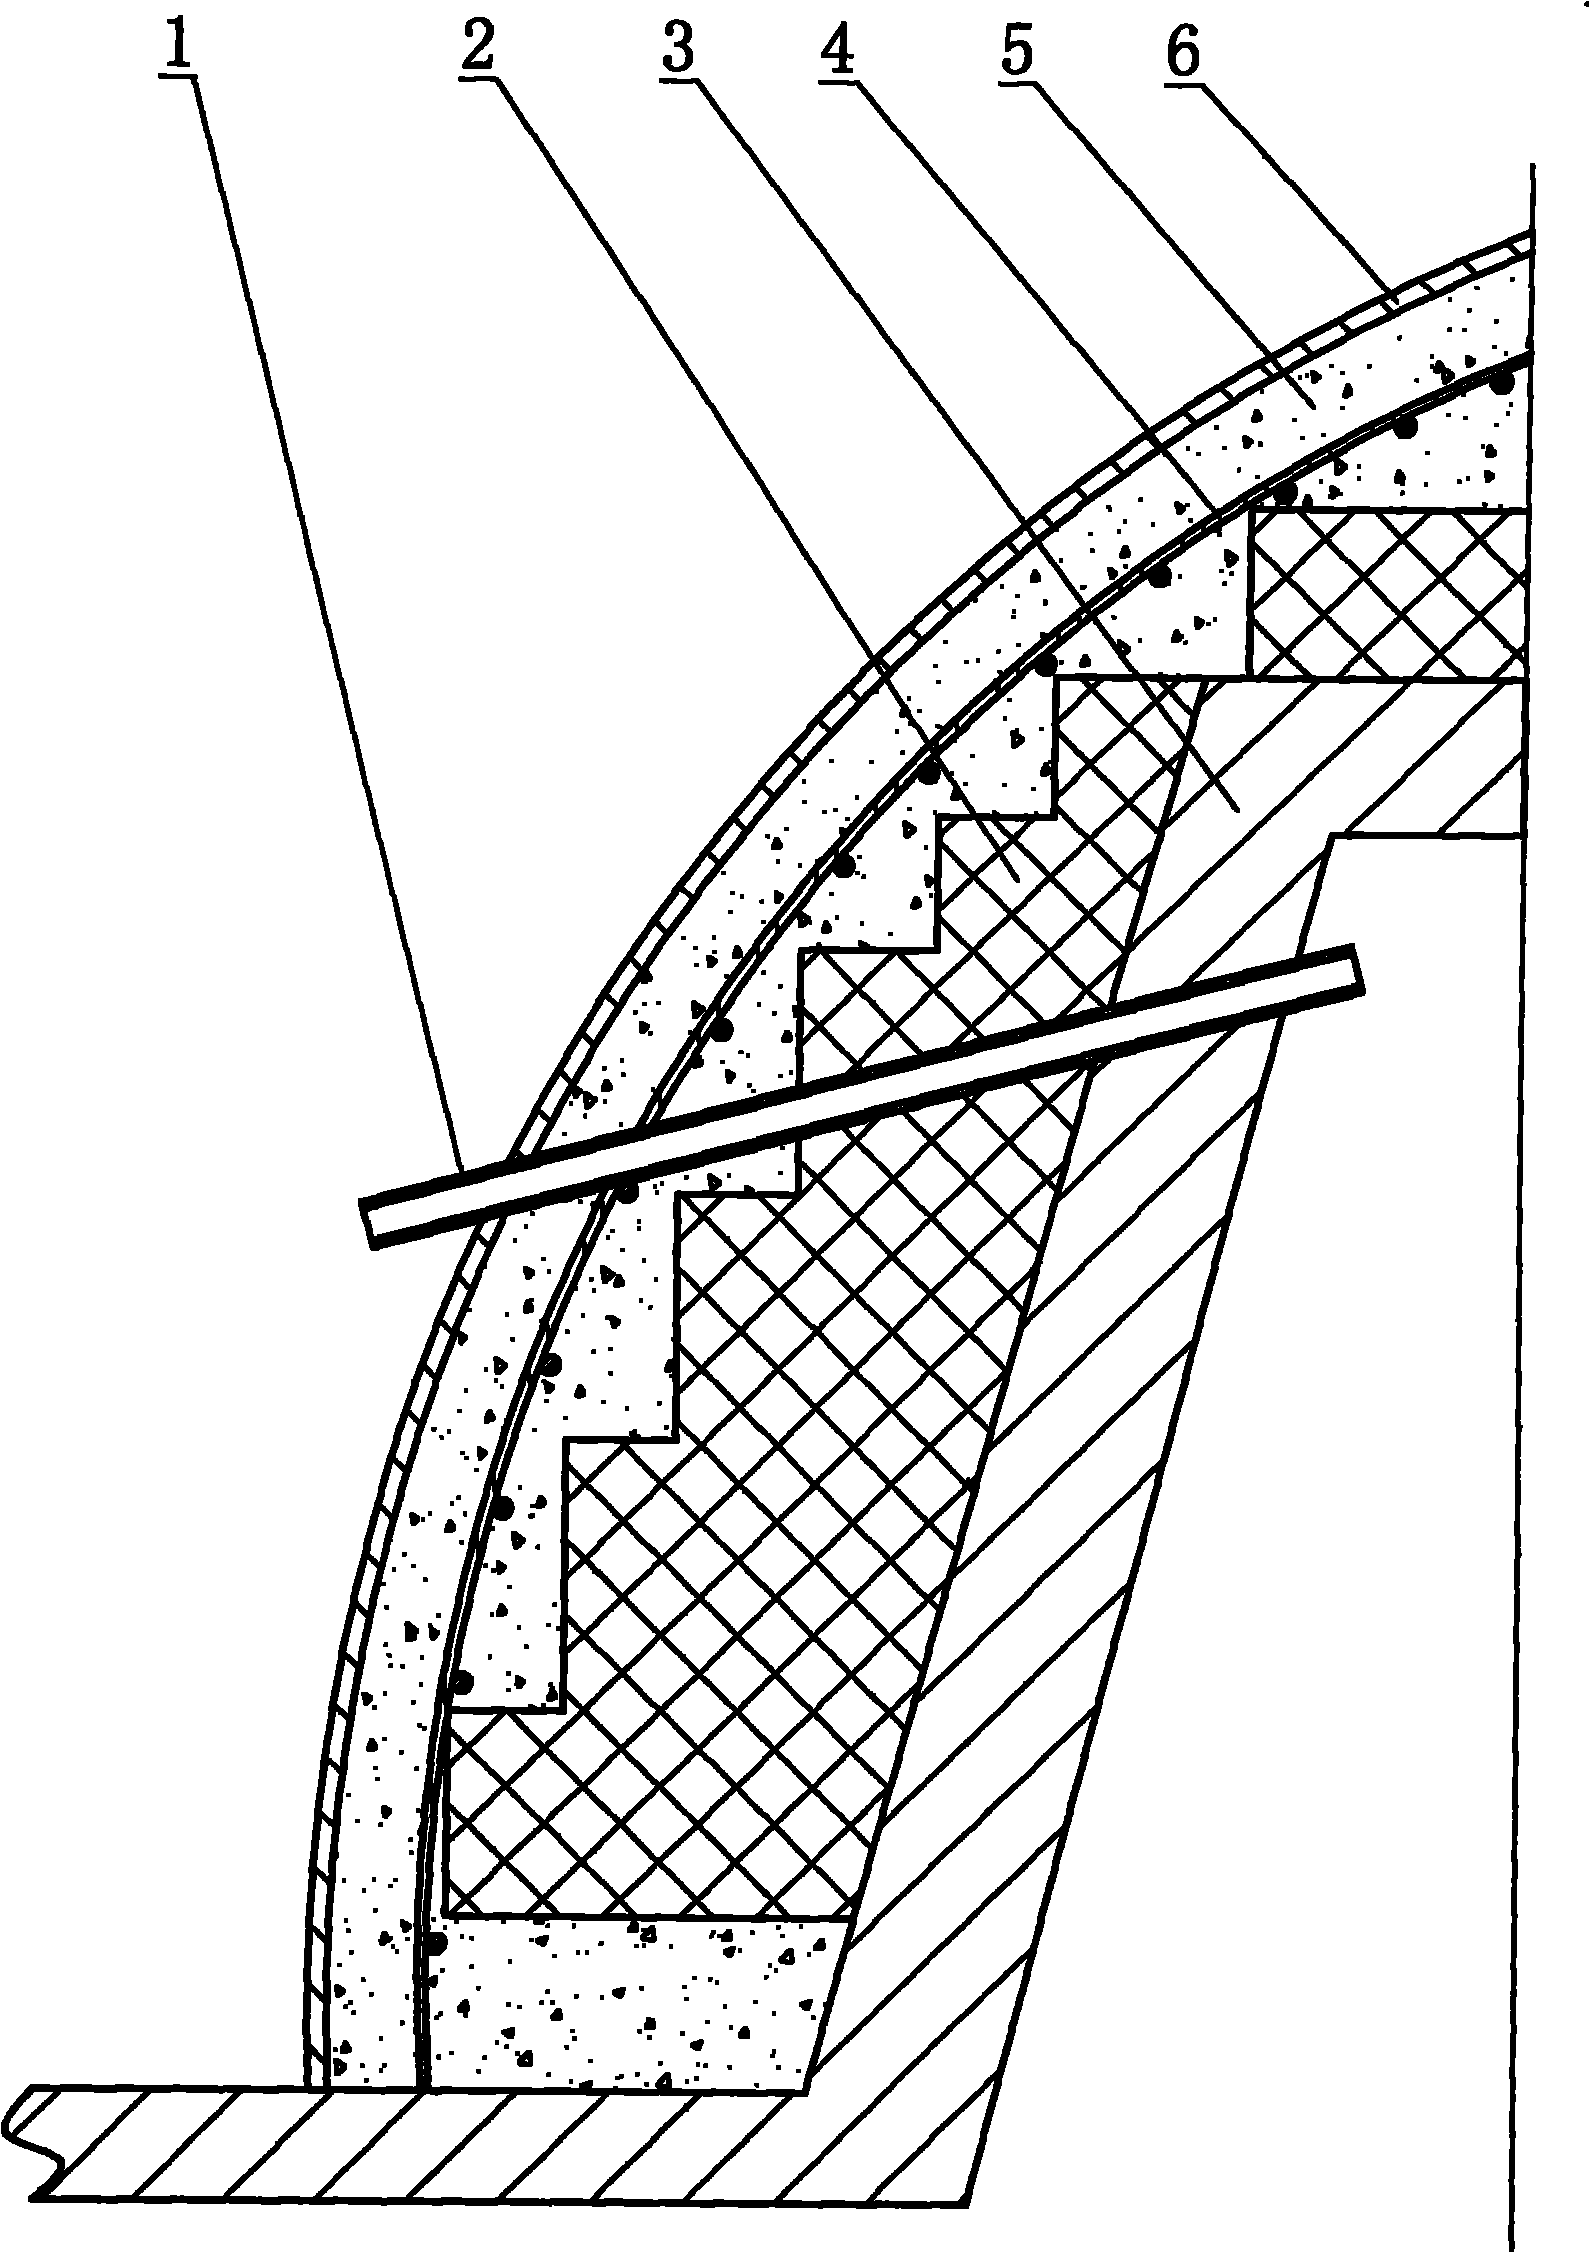 Construction method of hyperboloidal concrete structure of coal tower storage bunker incline wall